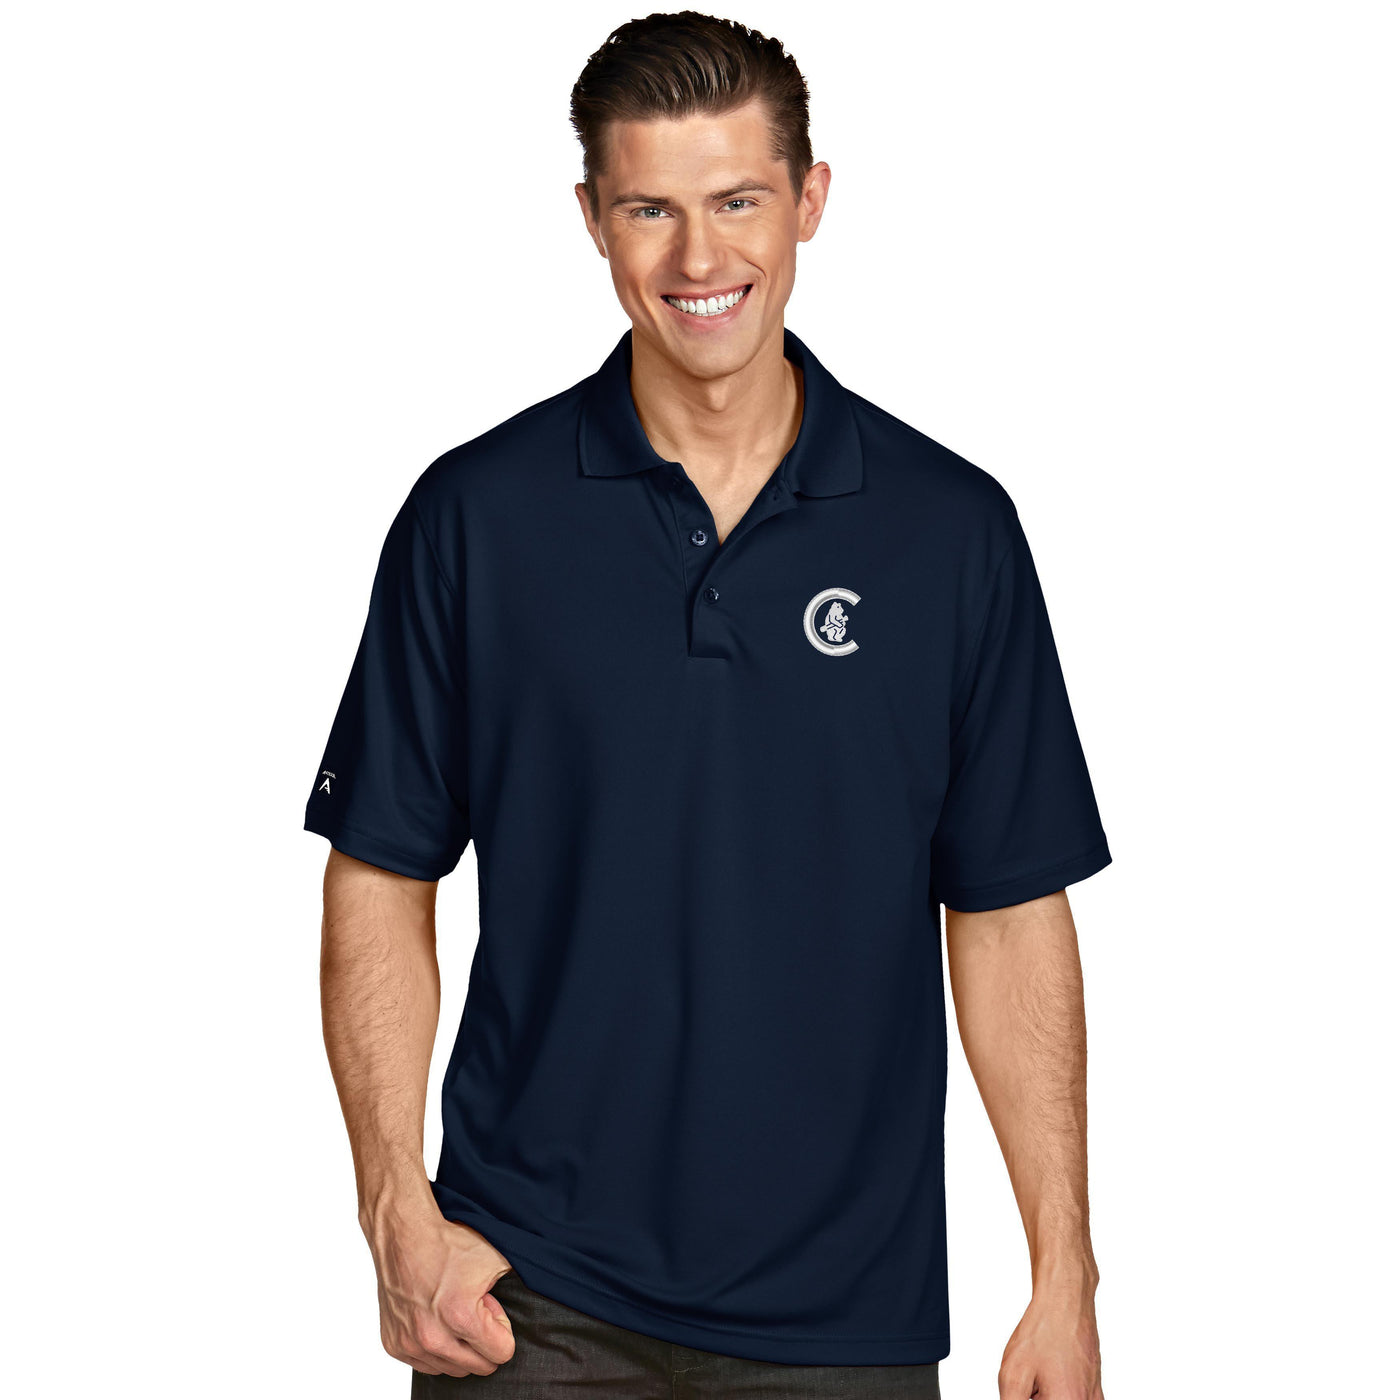 XTRA-LITE 1914 CHICAGO CUBS POLO - Ivy Shop